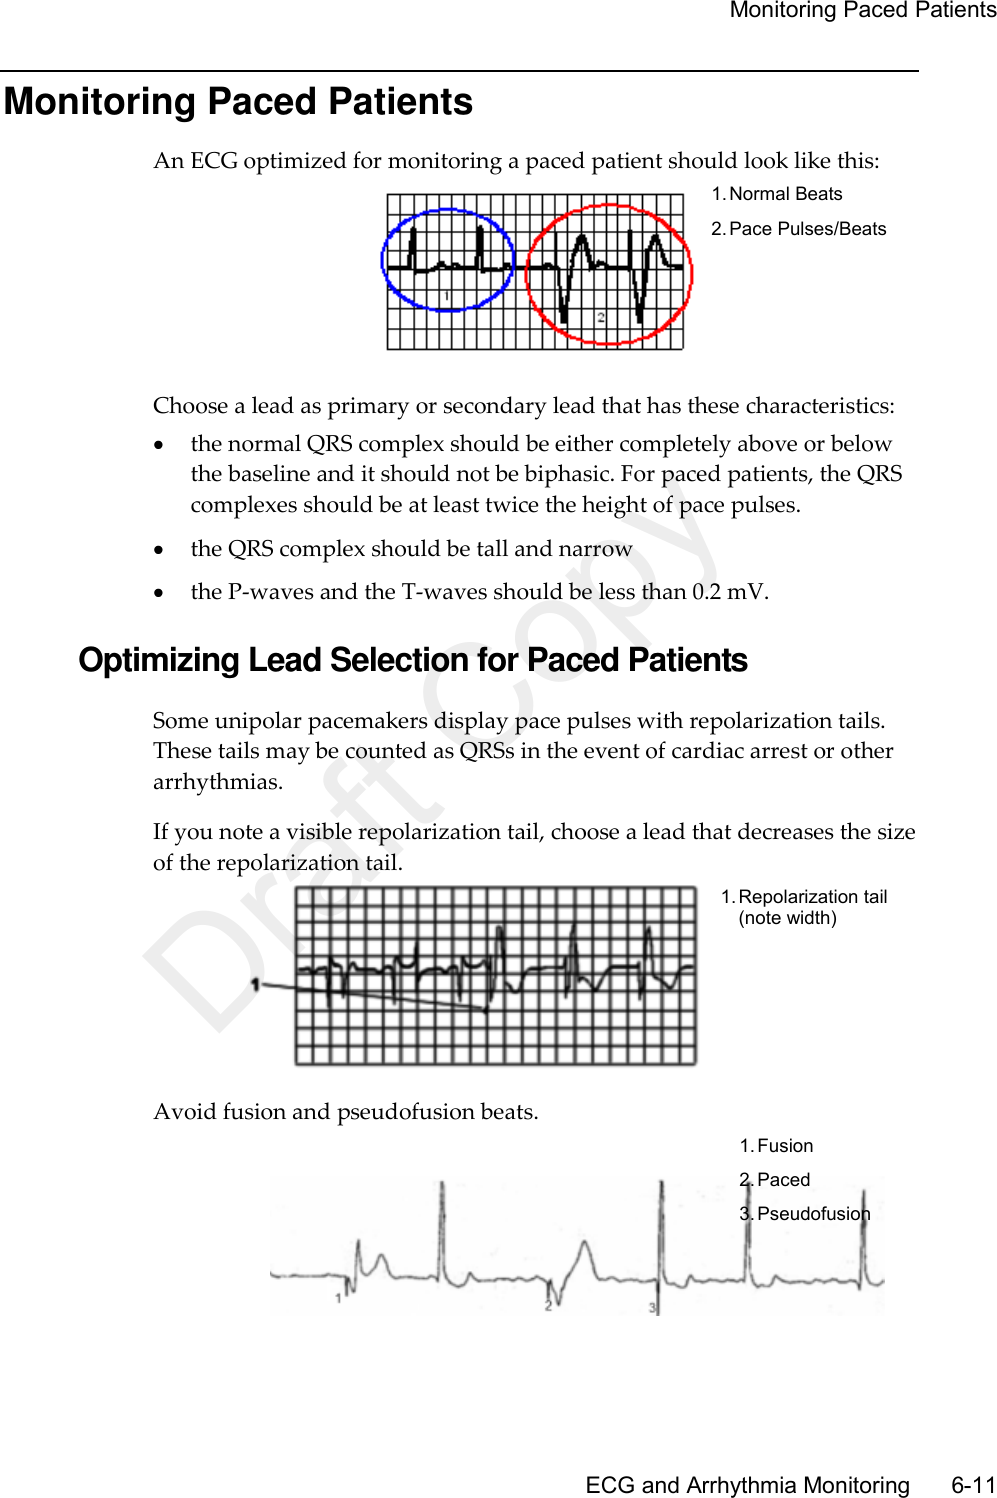     Monitoring Paced Patients       ECG and Arrhythmia Monitoring      6-11 Monitoring Paced Patients An ECG optimized for monitoring a paced patient should look like this:  1. Normal Beats 2. Pace Pulses/Beats Choose a lead as primary or secondary lead that has these characteristics:  the normal QRS complex should be either completely above or below the baseline and it should not be biphasic. For paced patients, the QRS complexes should be at least twice the height of pace pulses.  the QRS complex should be tall and narrow  the P-waves and the T-waves should be less than 0.2 mV.  Optimizing Lead Selection for Paced Patients Some unipolar pacemakers display pace pulses with repolarization tails. These tails may be counted as QRSs in the event of cardiac arrest or other arrhythmias. If you note a visible repolarization tail, choose a lead that decreases the size of the repolarization tail.  1. Repolarization tail (note width) Avoid fusion and pseudofusion beats.  1. Fusion 2. Paced 3. Pseudofusion   Draft Copy